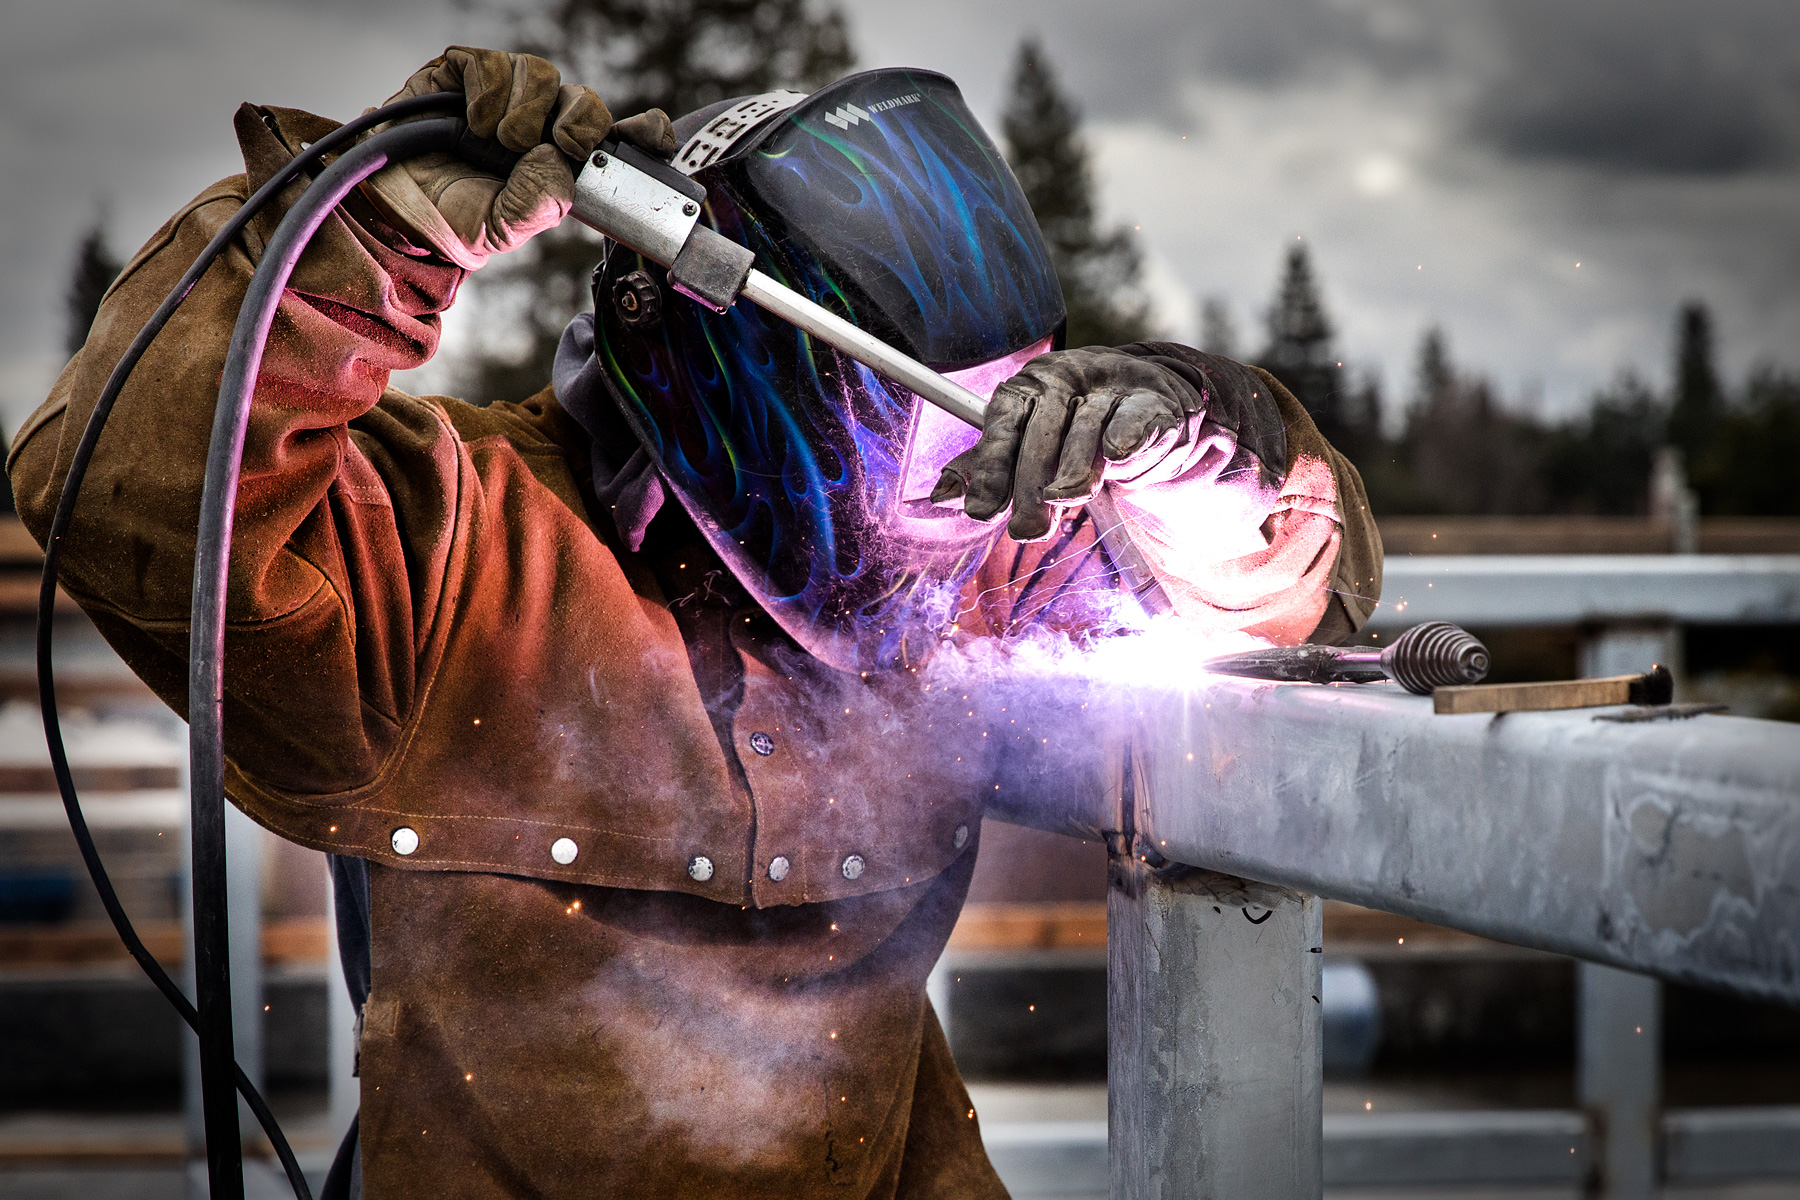 Welder on construction worksite in the San Francisco Bay Area. Photo by Chris Constantine.